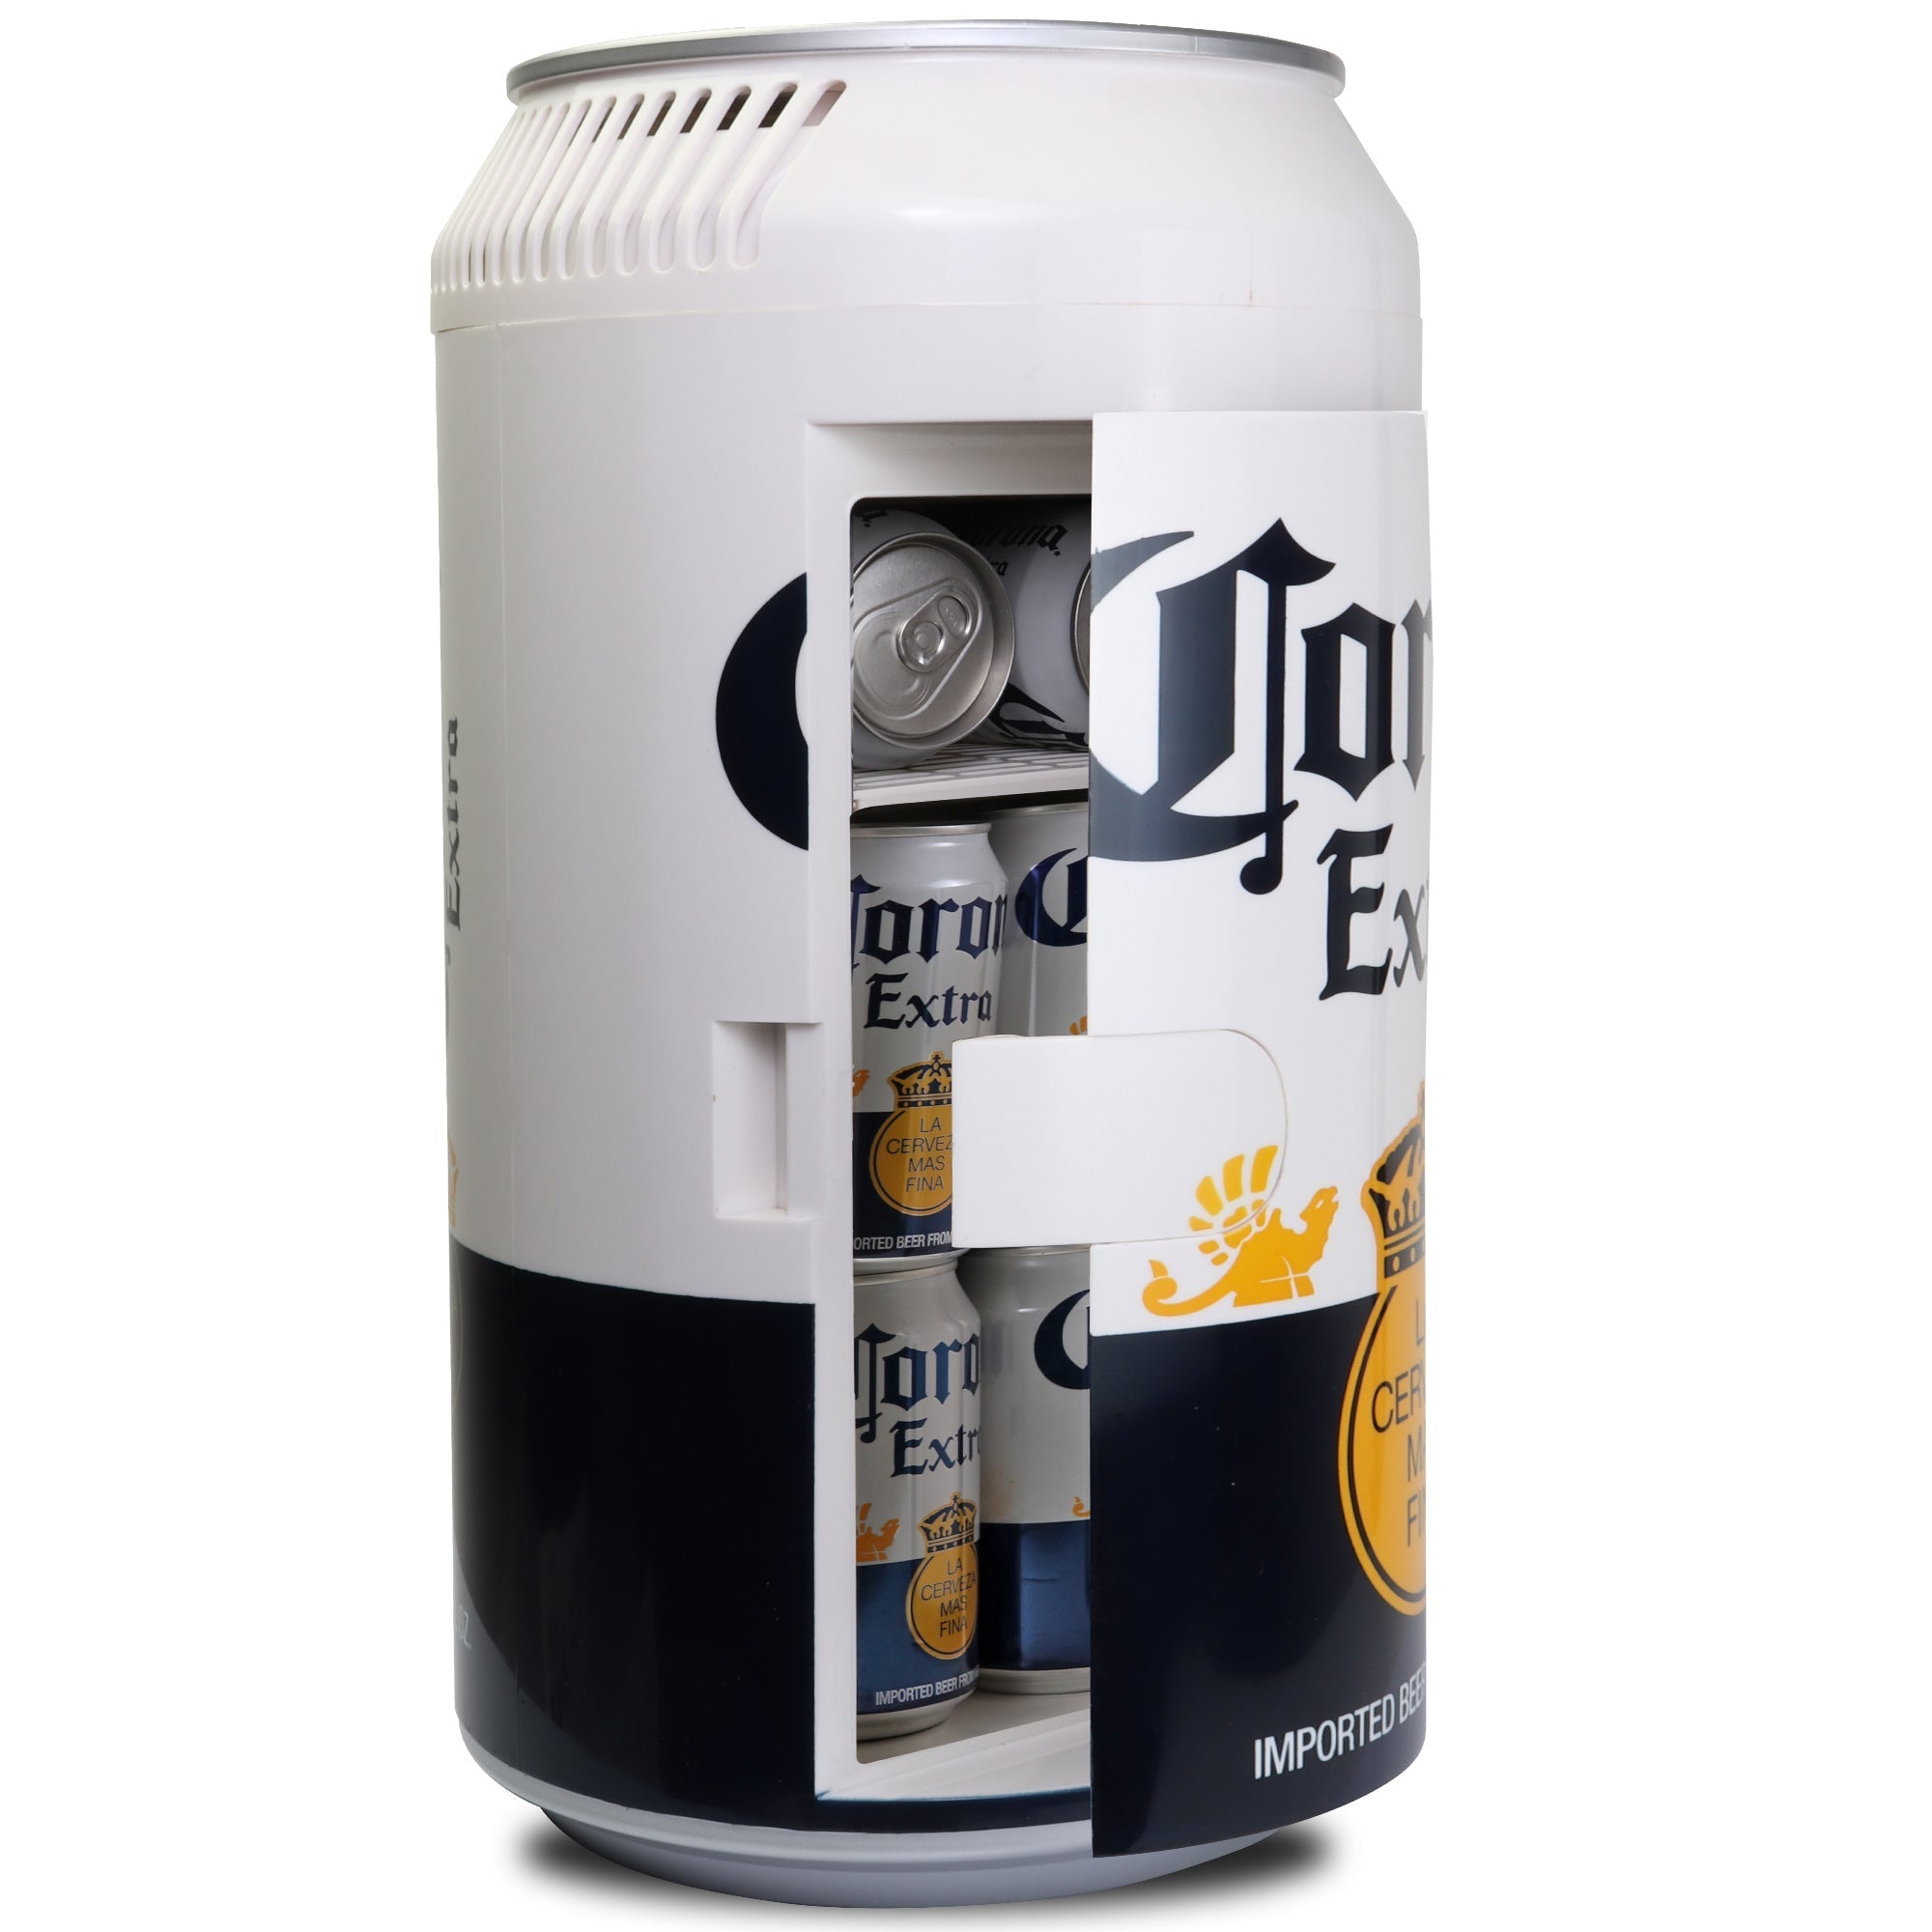 Product shot of Corona can-shaped mini fridge, open with 12 cans of Corona beer inside, on a white background